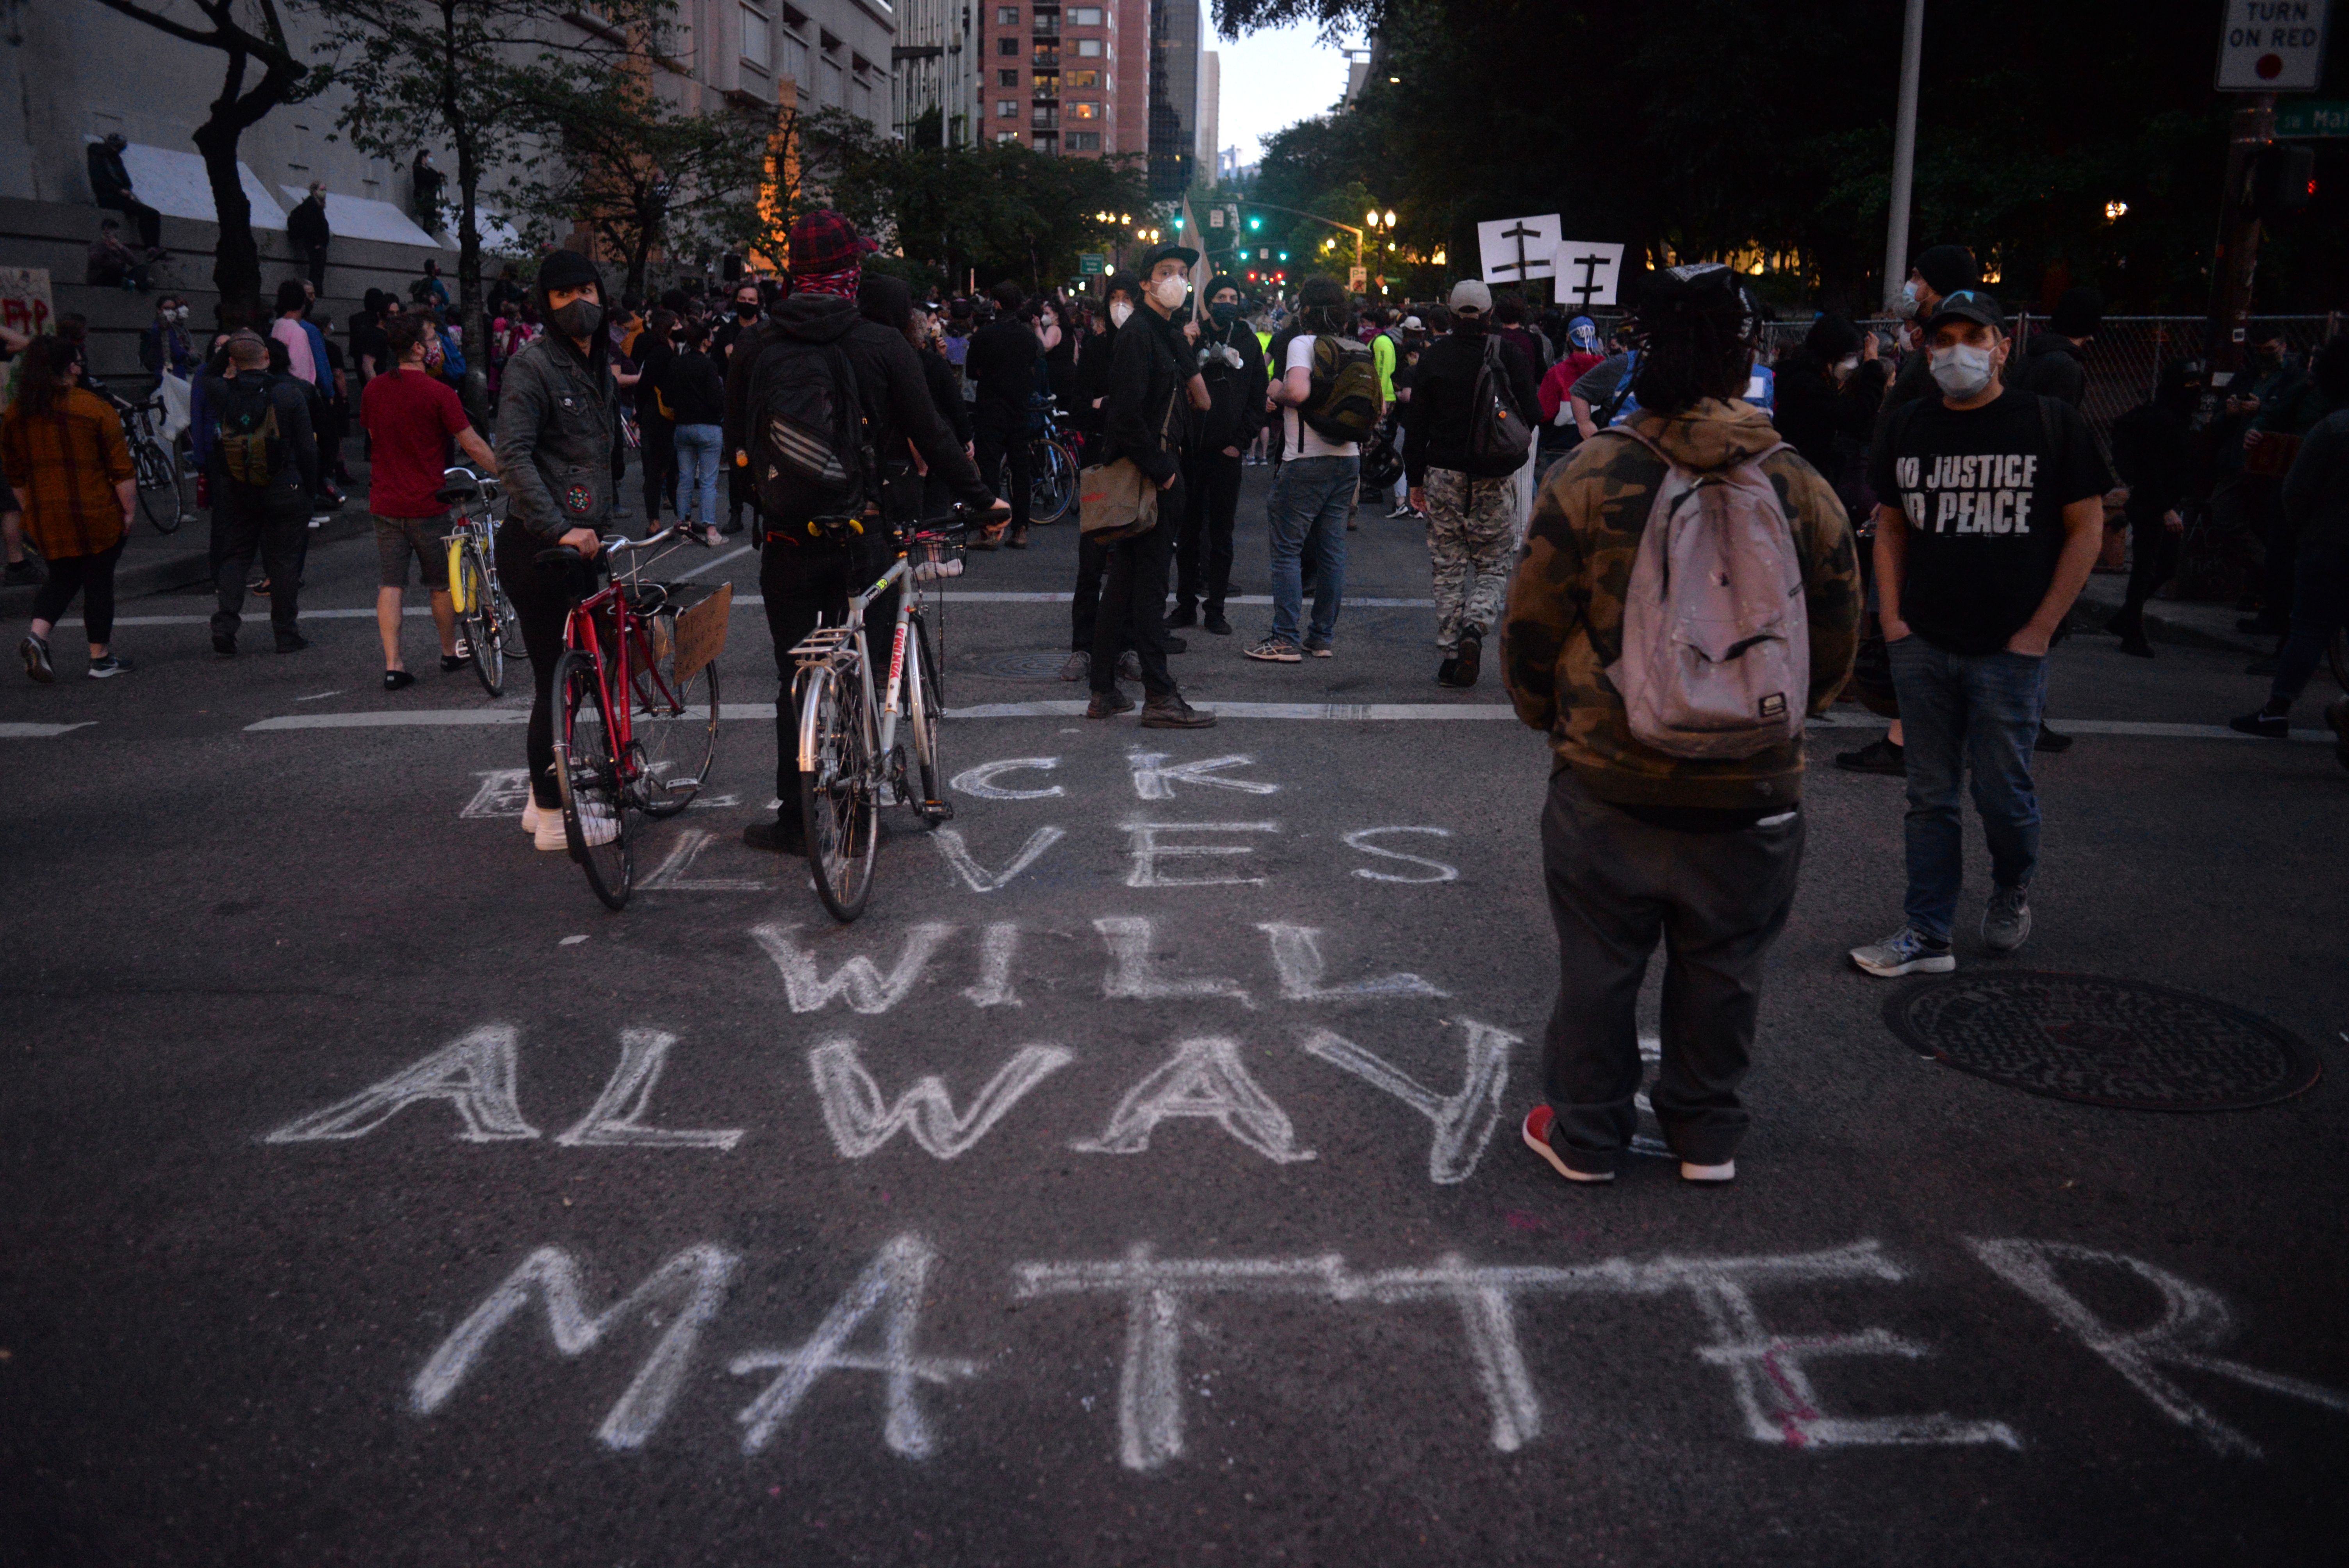 "black lives will always matter" spray painted on to the street